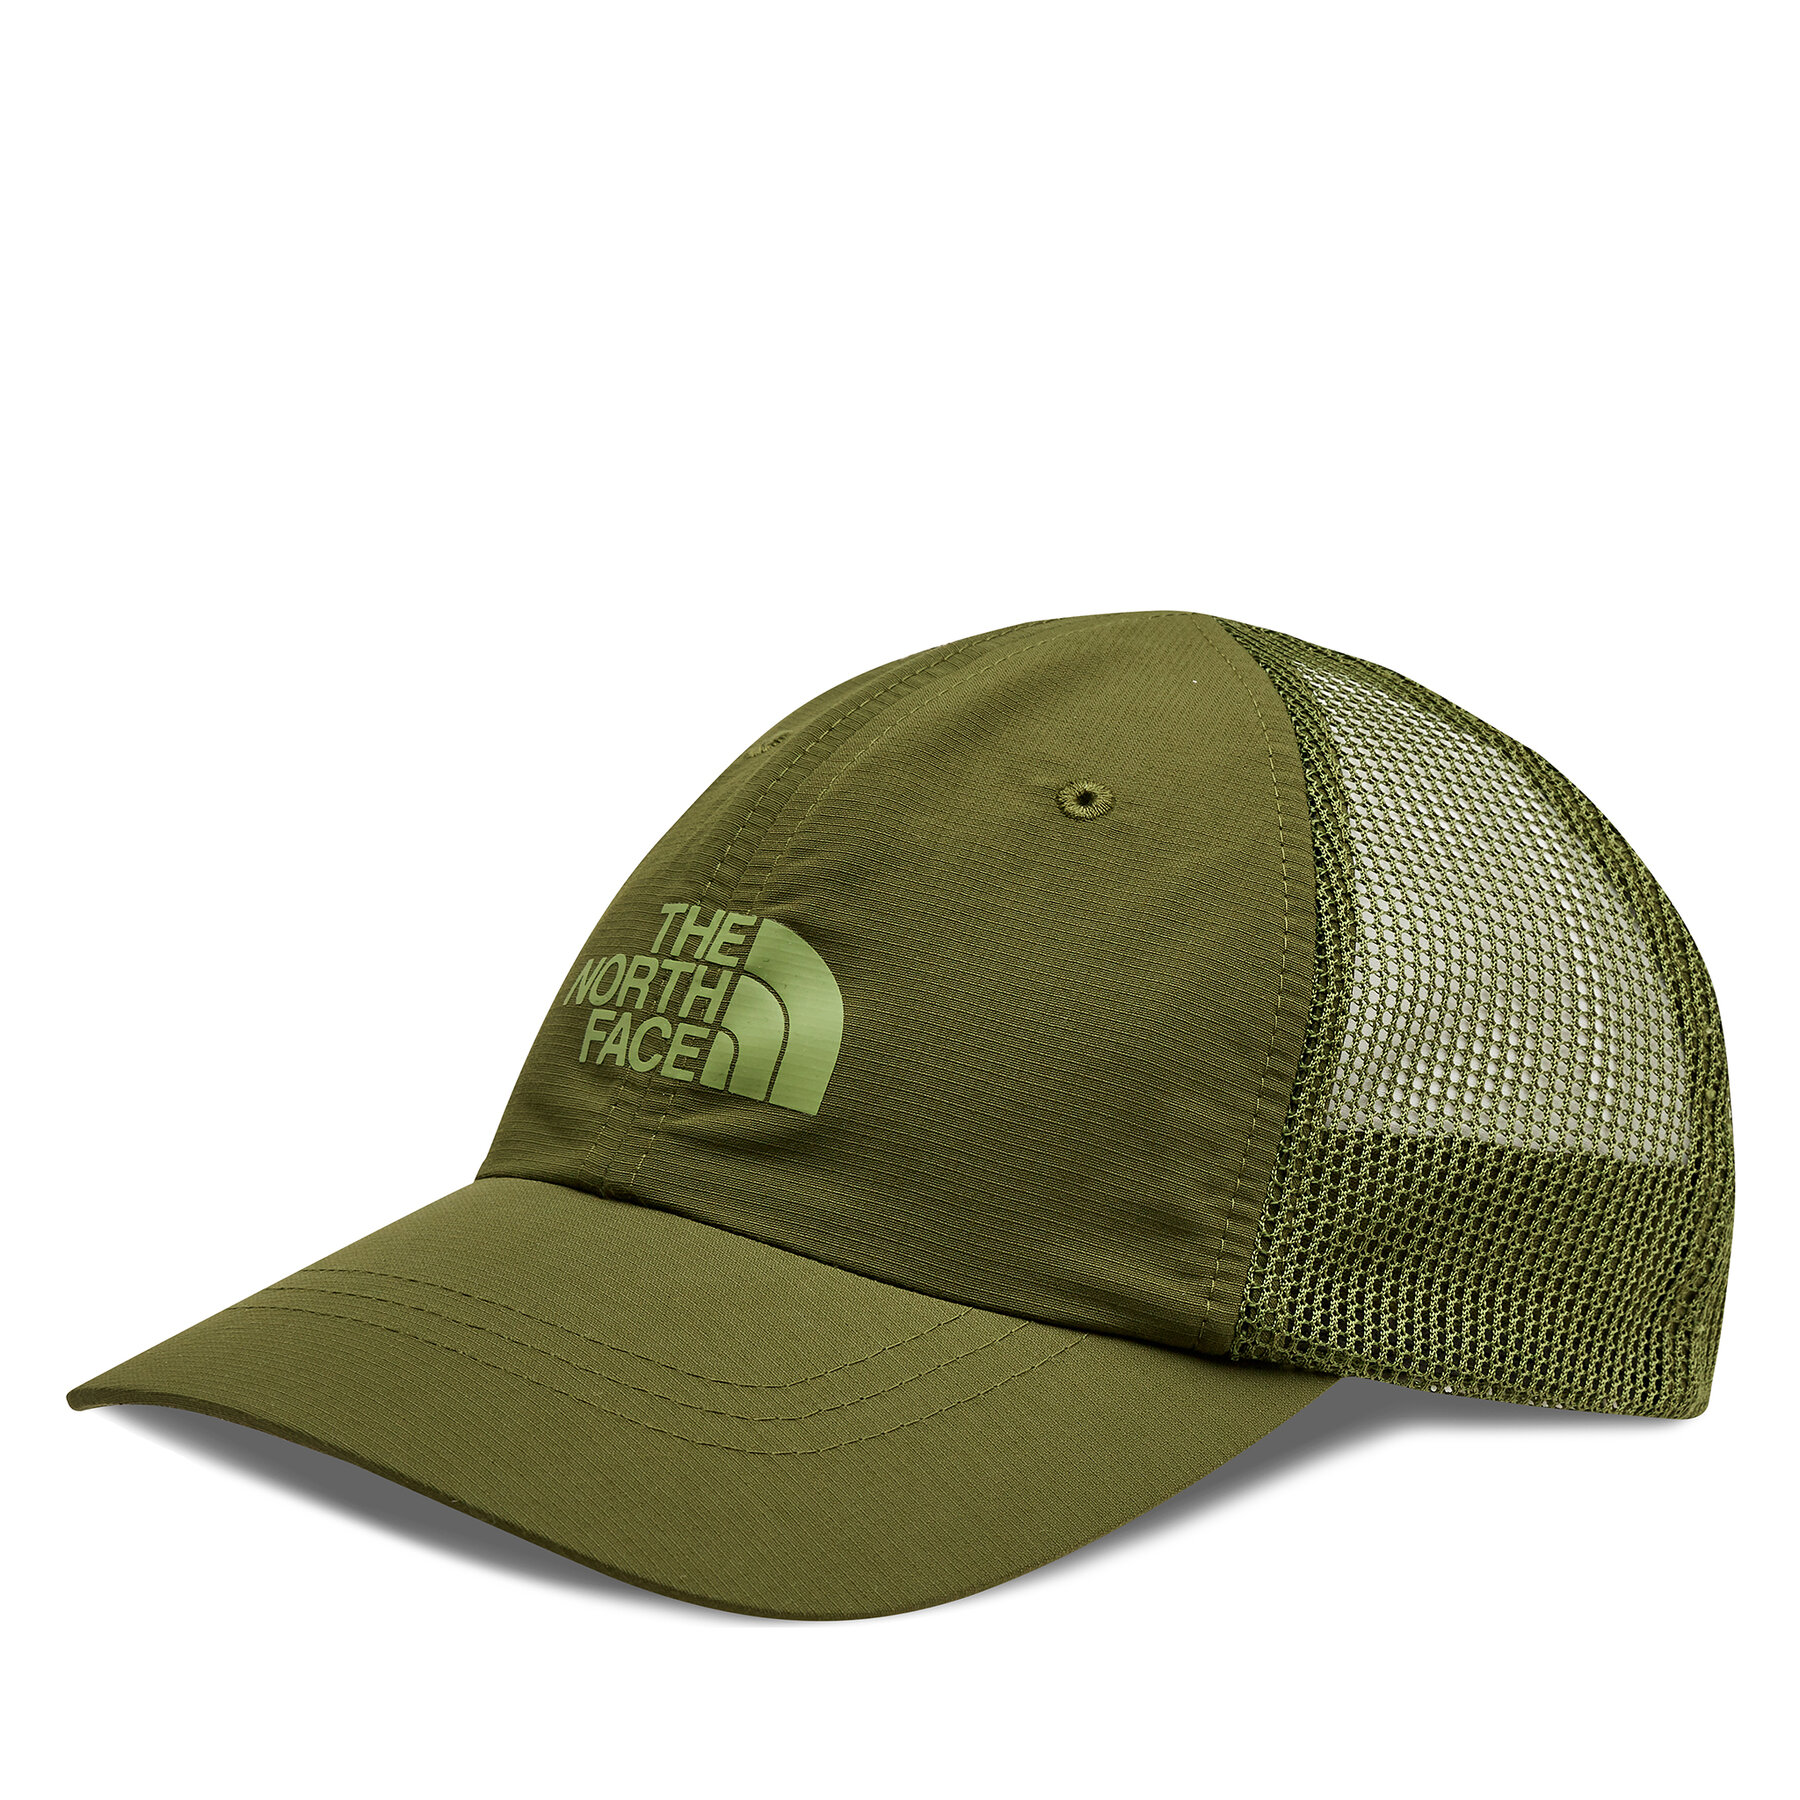 Cap The North Face Horizon NF0A5FXSPIB1 Forest Olive von The North Face